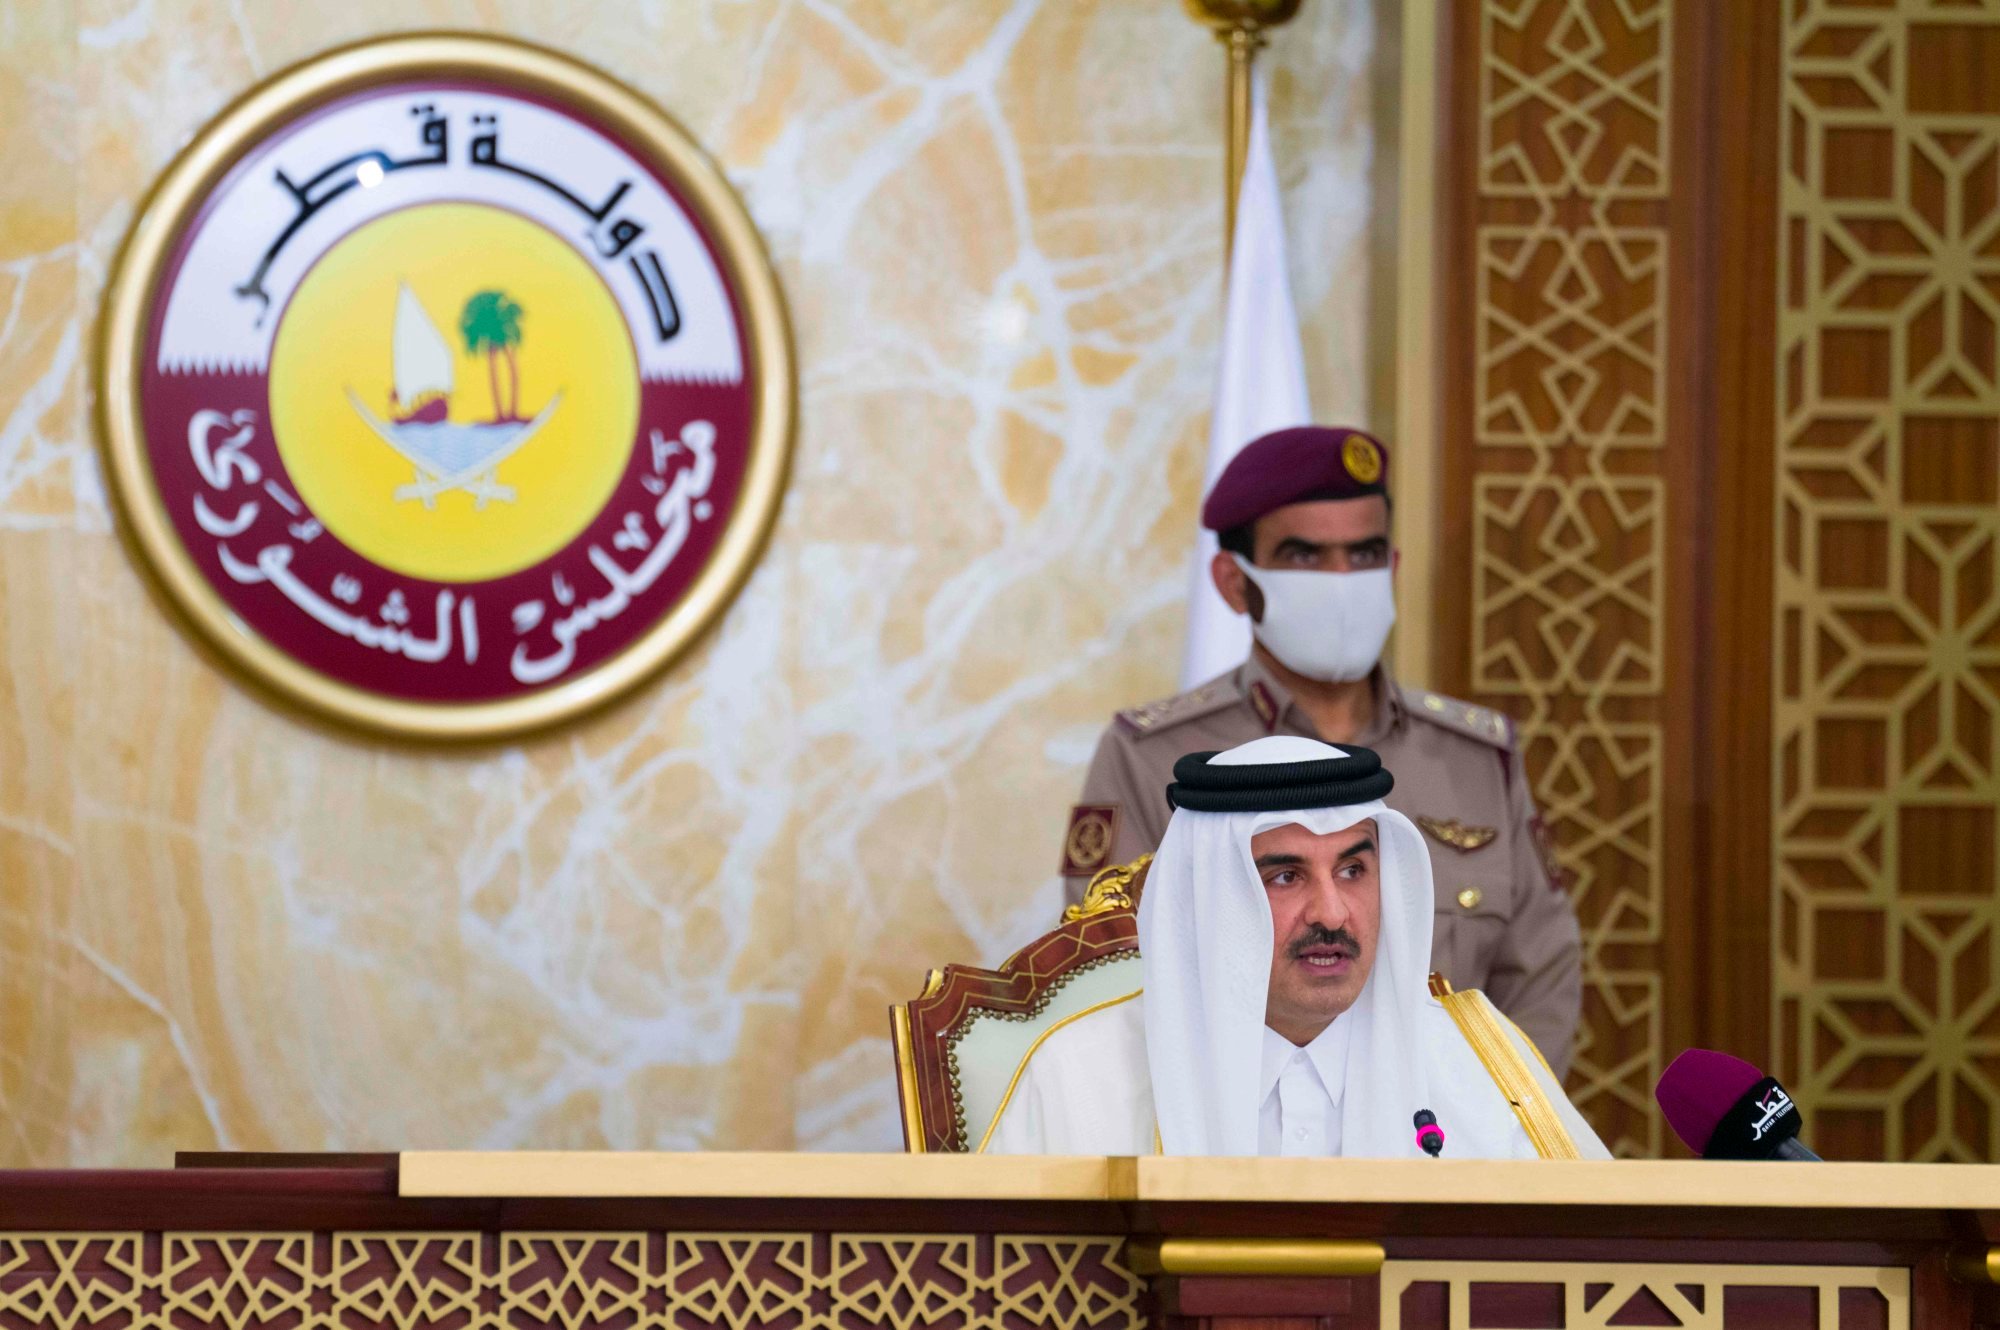 Qatar’s Sheikh Tamim bin Hamad al-Thani delivering a speech to the Shura Council in the capital Doha. Photo: AFP